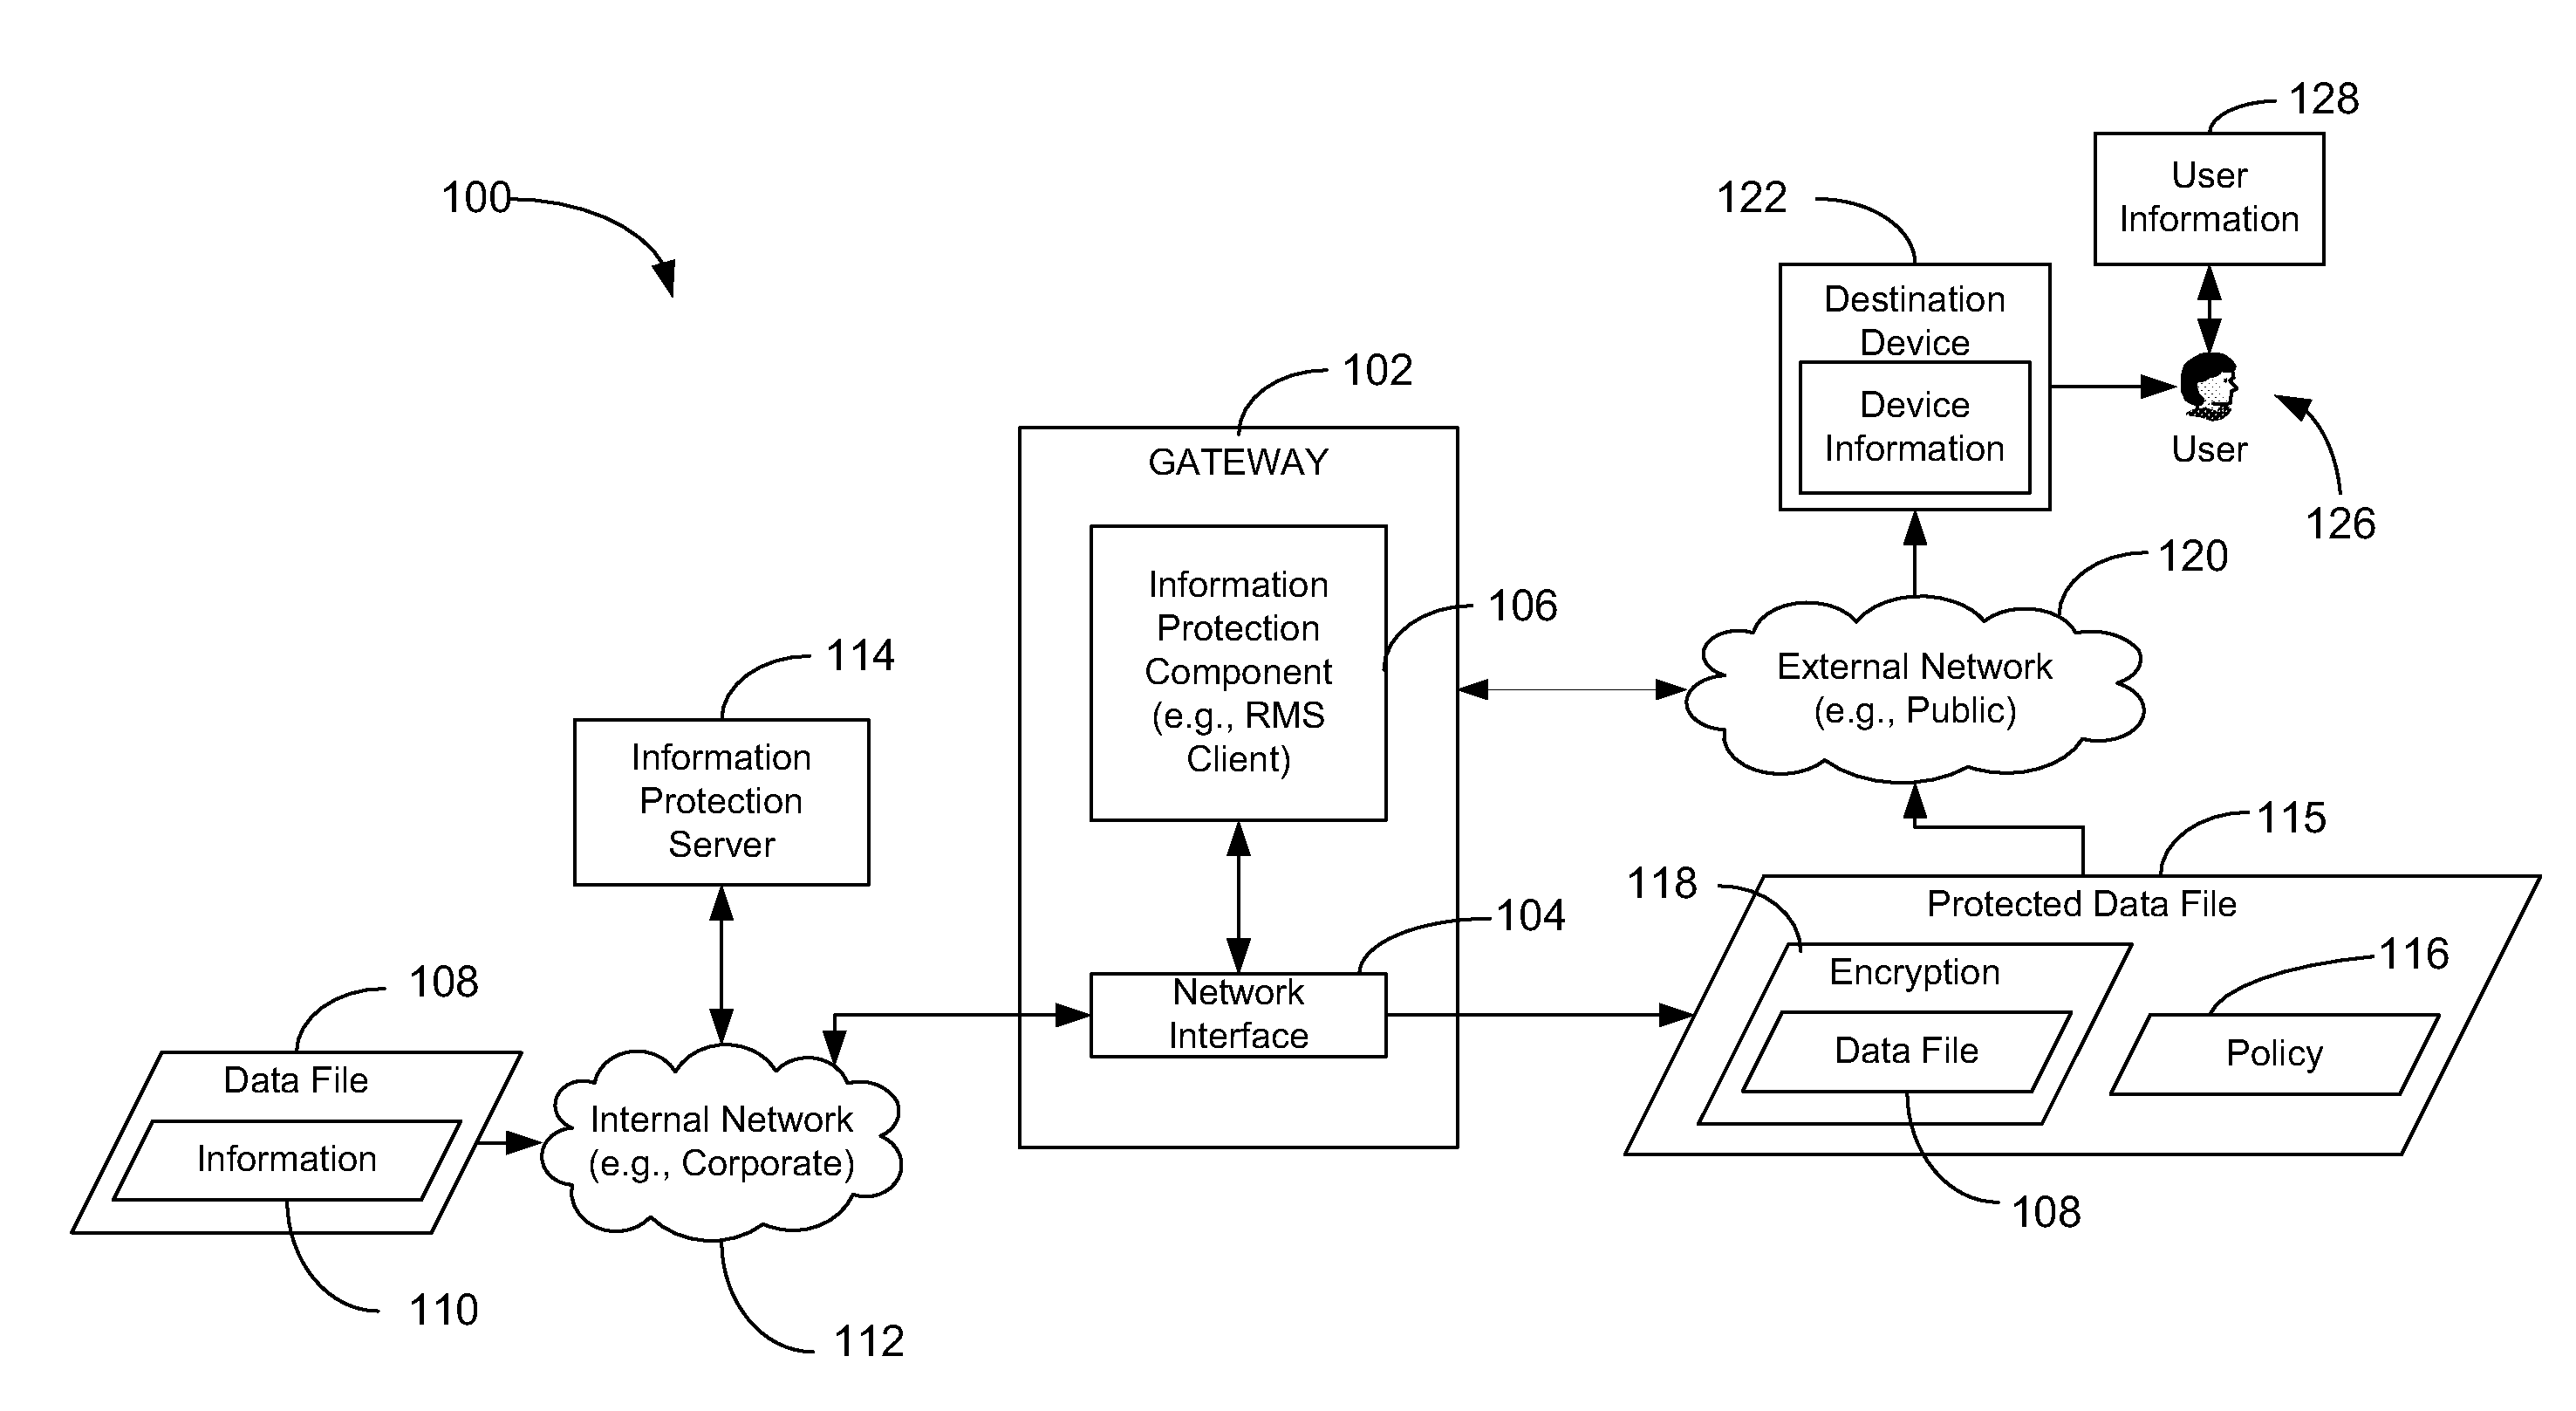 Information protection applied by an intermediary device